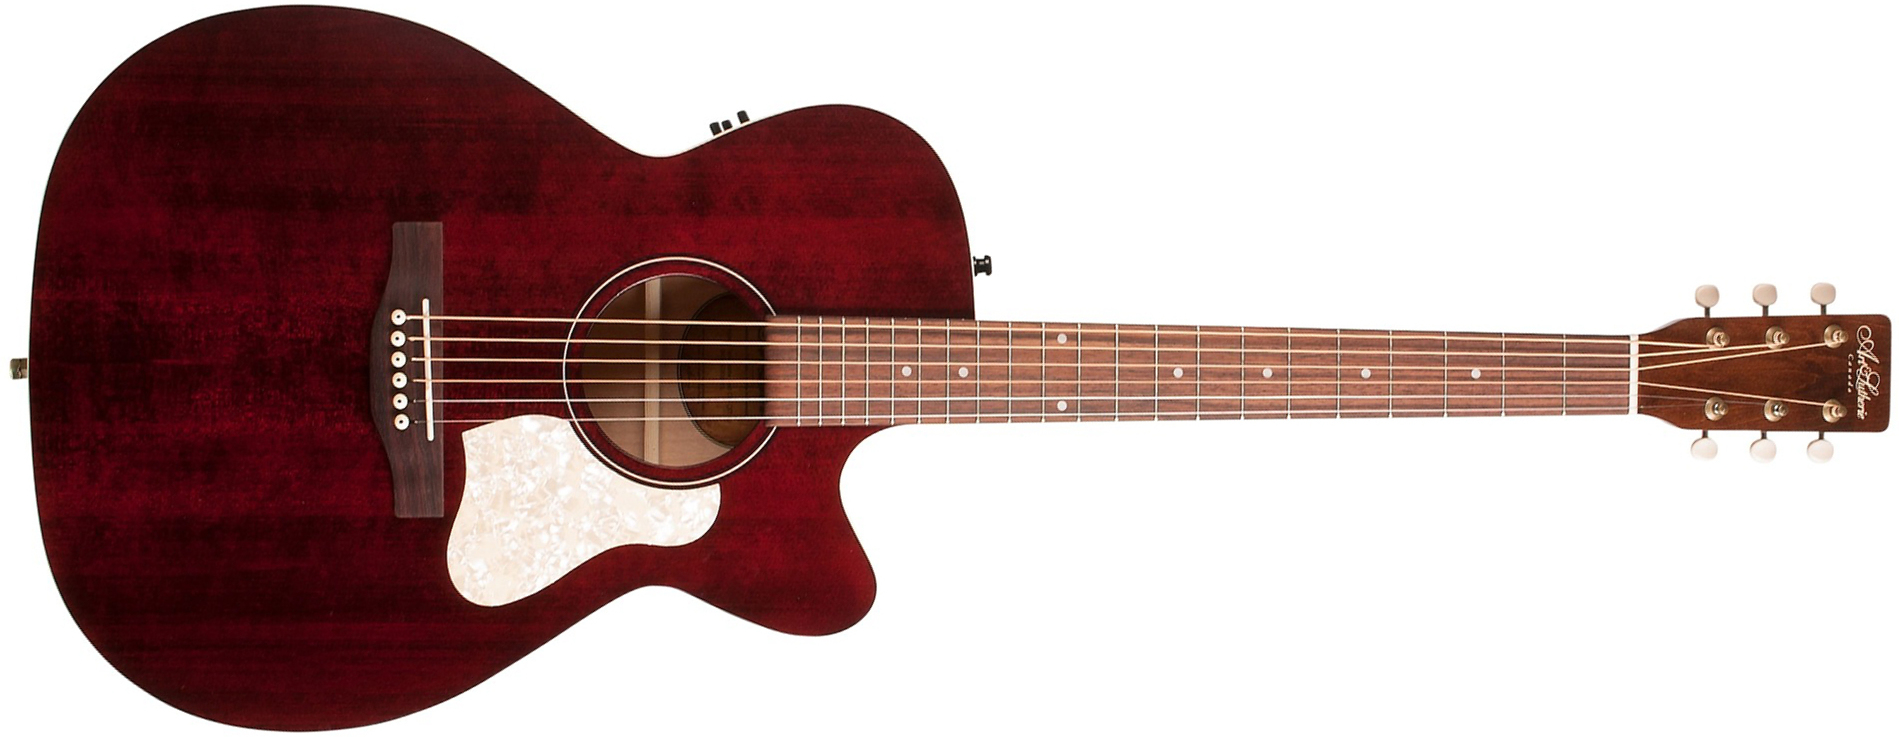 Art Et Lutherie Legacy Cw Presys Ii Concert Hall Cedre Merisier Rw - Tennessee Red - Electro acoustic guitar - Main picture